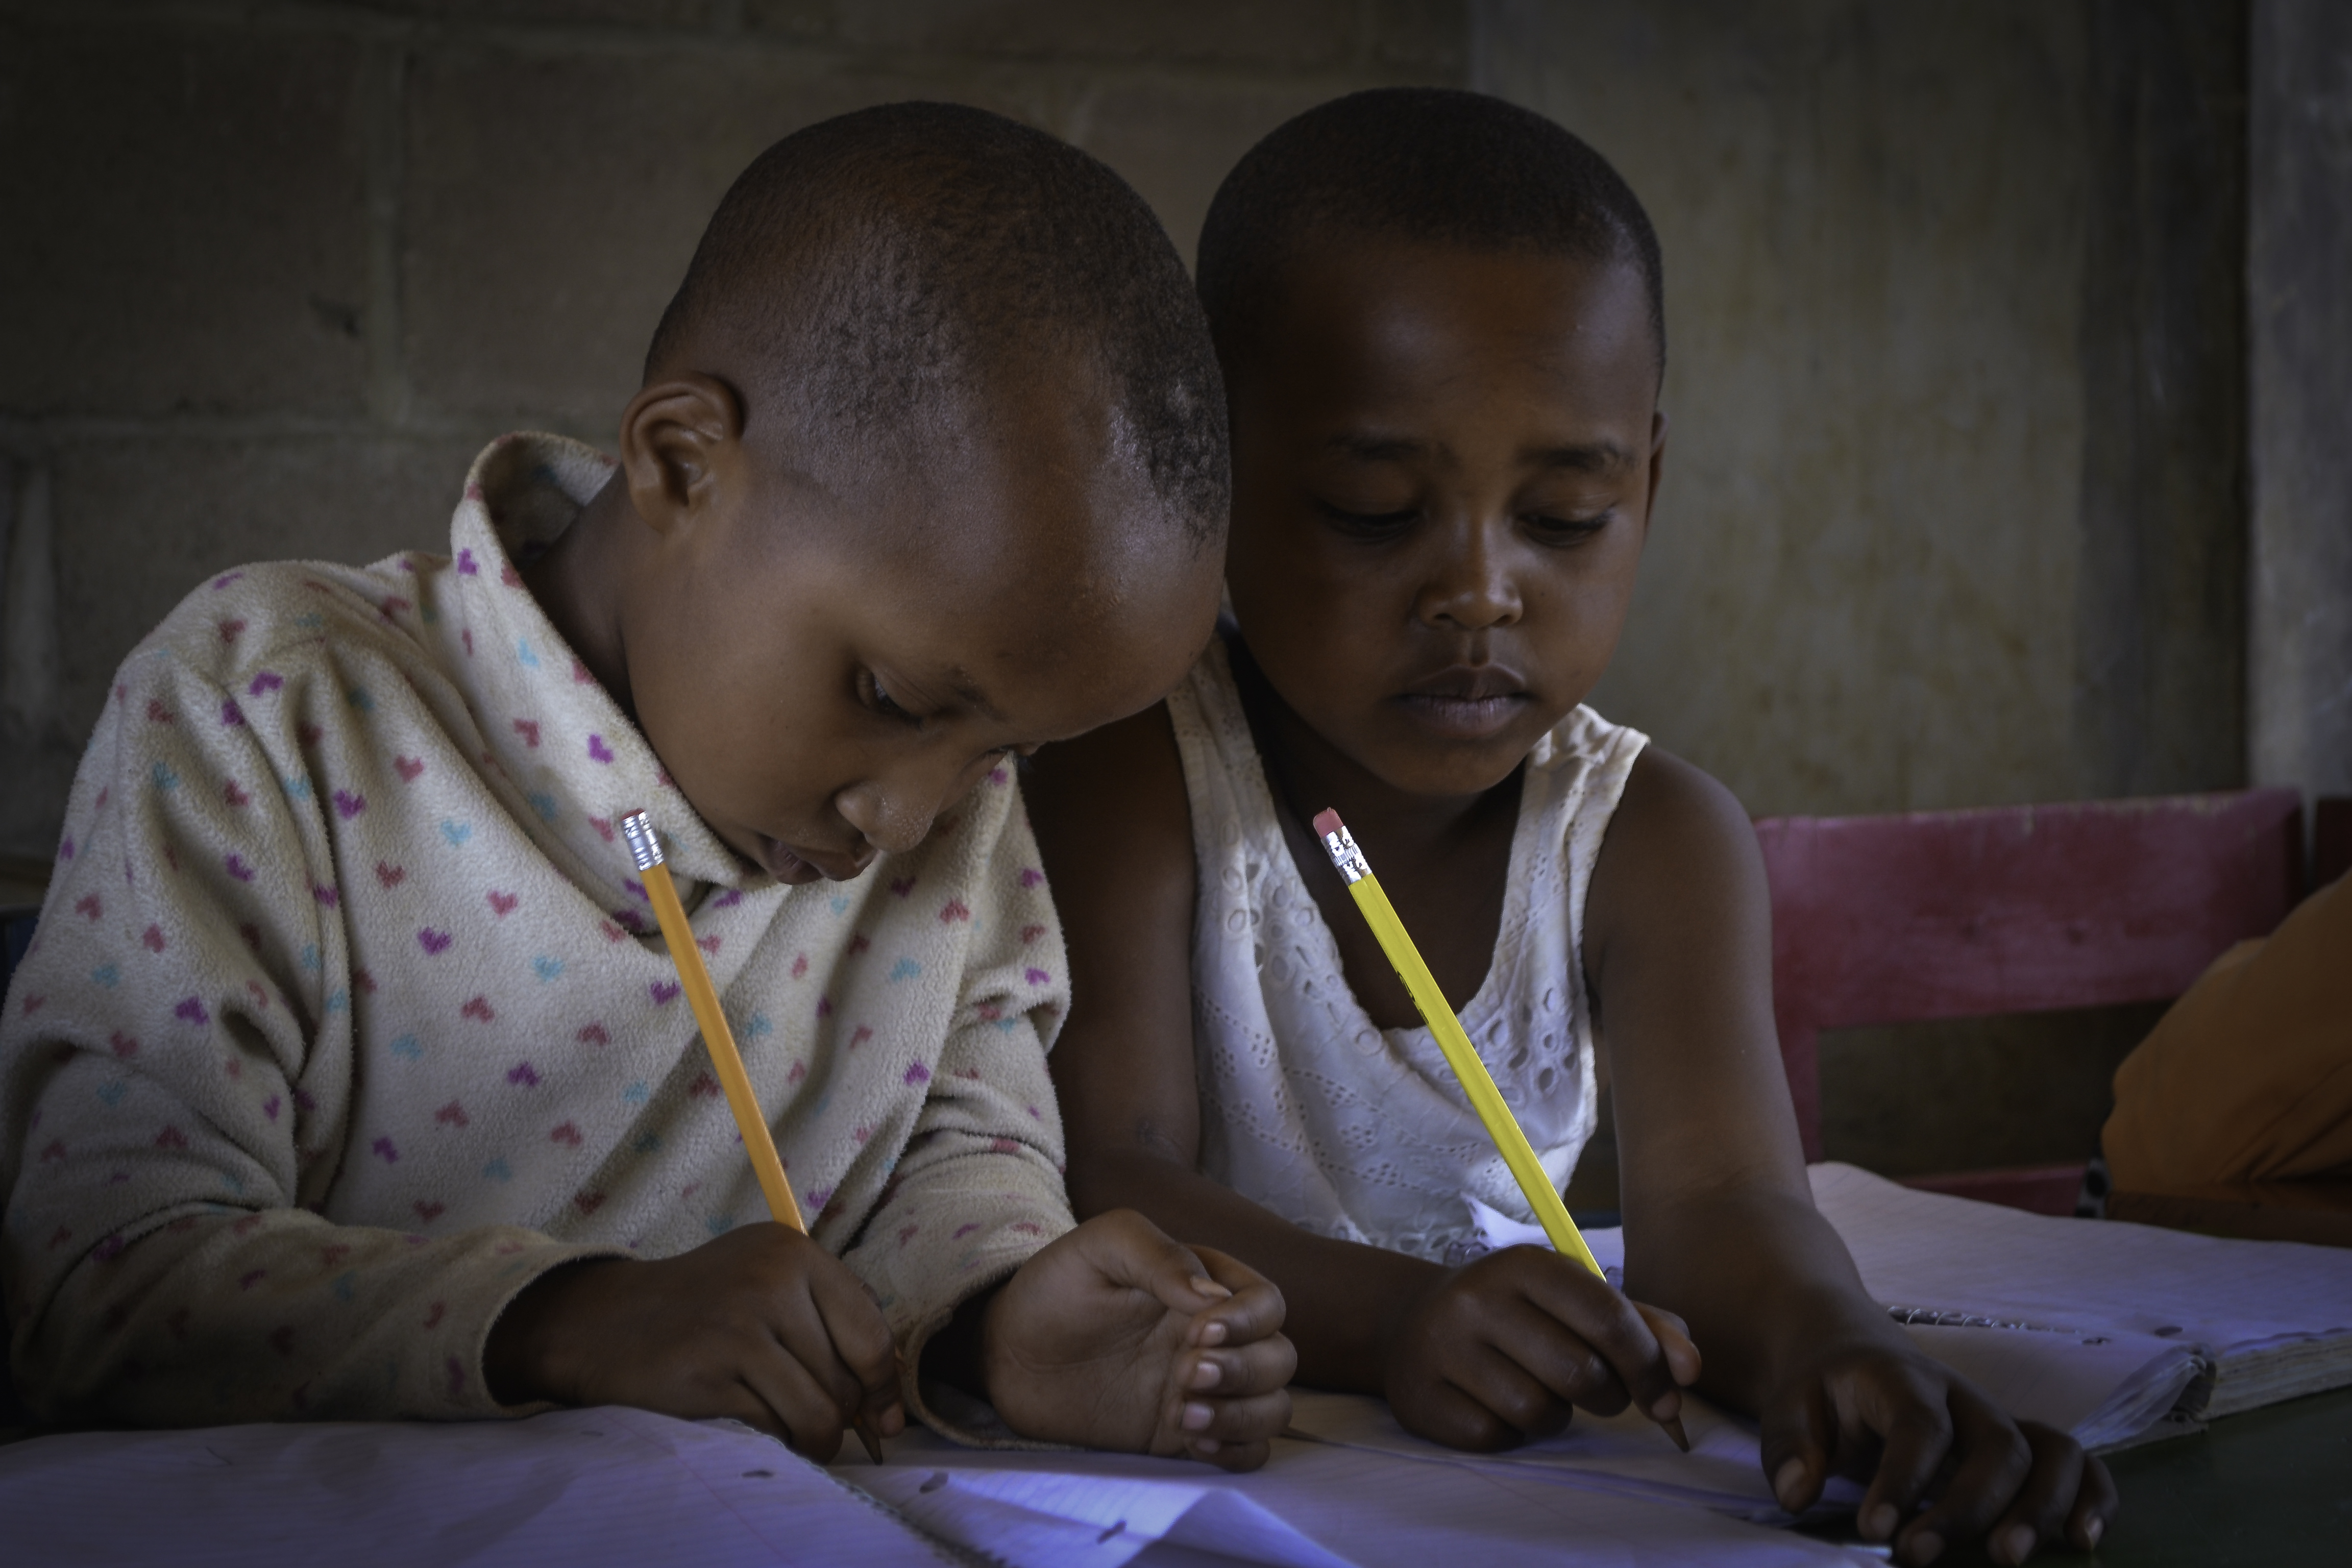 Early Childhood Development Programs in Rwanda’s Refugee Camps Help to Address the Psychological Impact of Forced Displacement